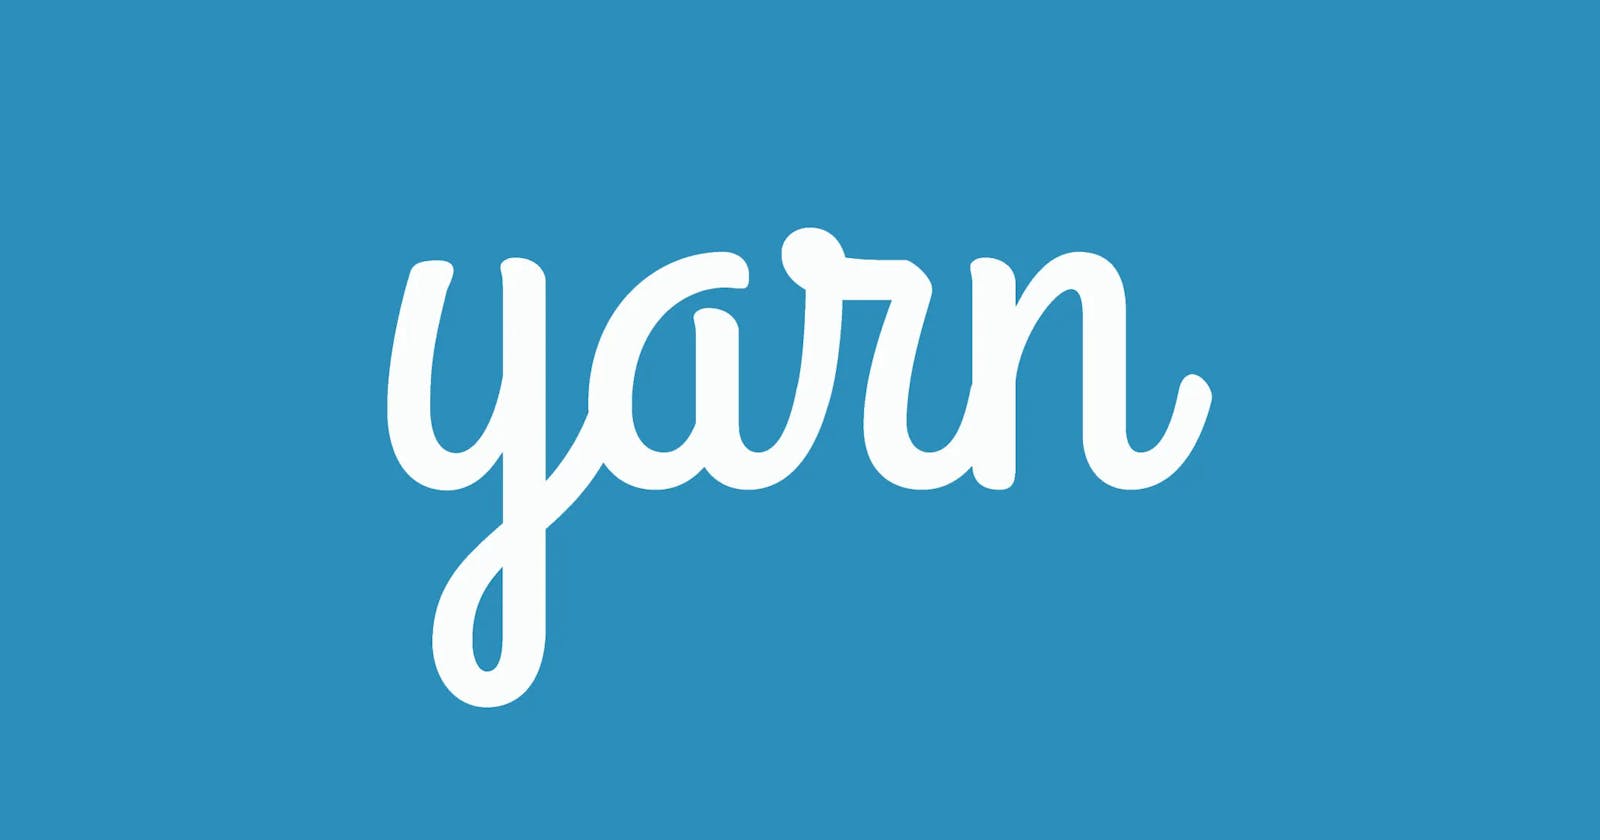 Understanding Yarn: A Modern Package Manager for JavaScript